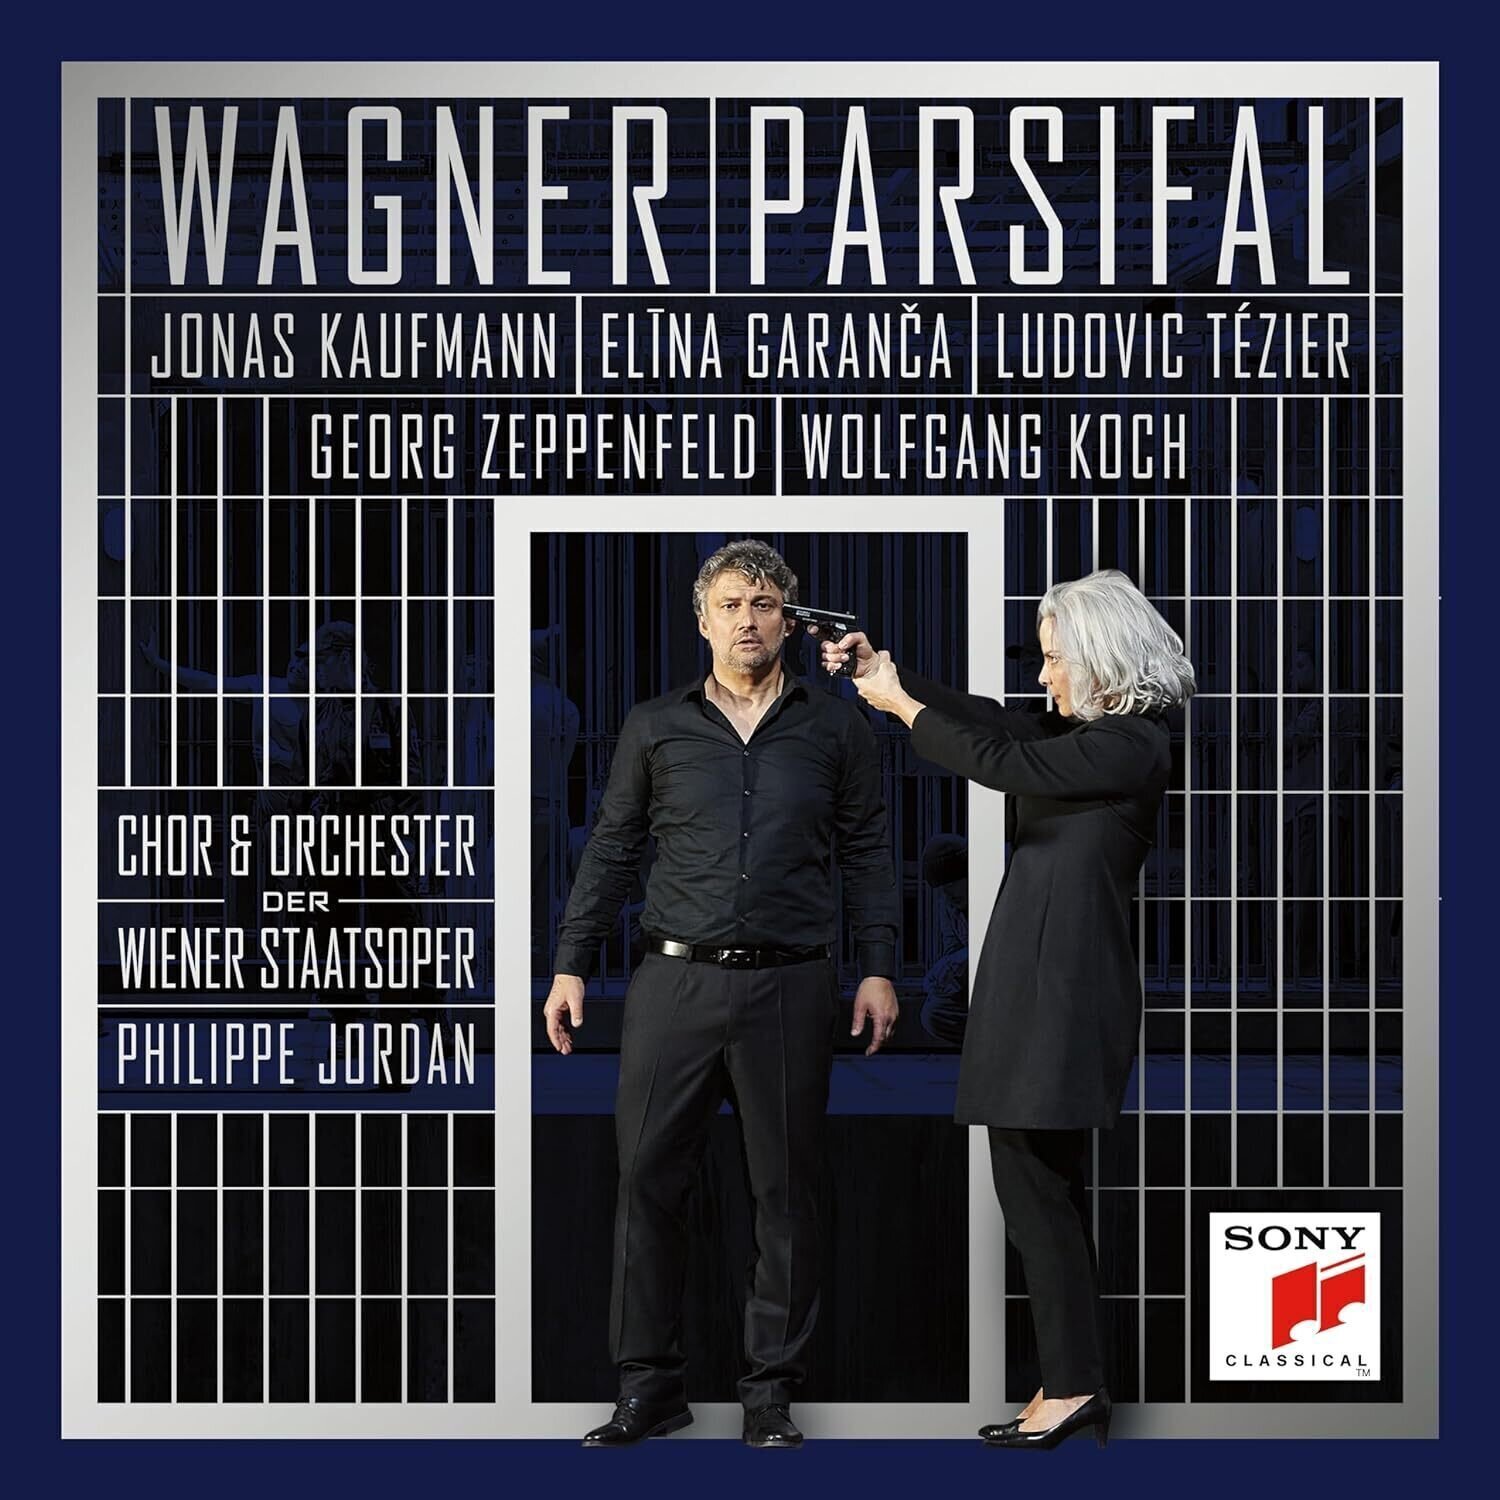 Glasbene CD Jonas Kaufmann - Wagner: Parsifal (Limited Edition) (Deluxe Edition) (4 CD)